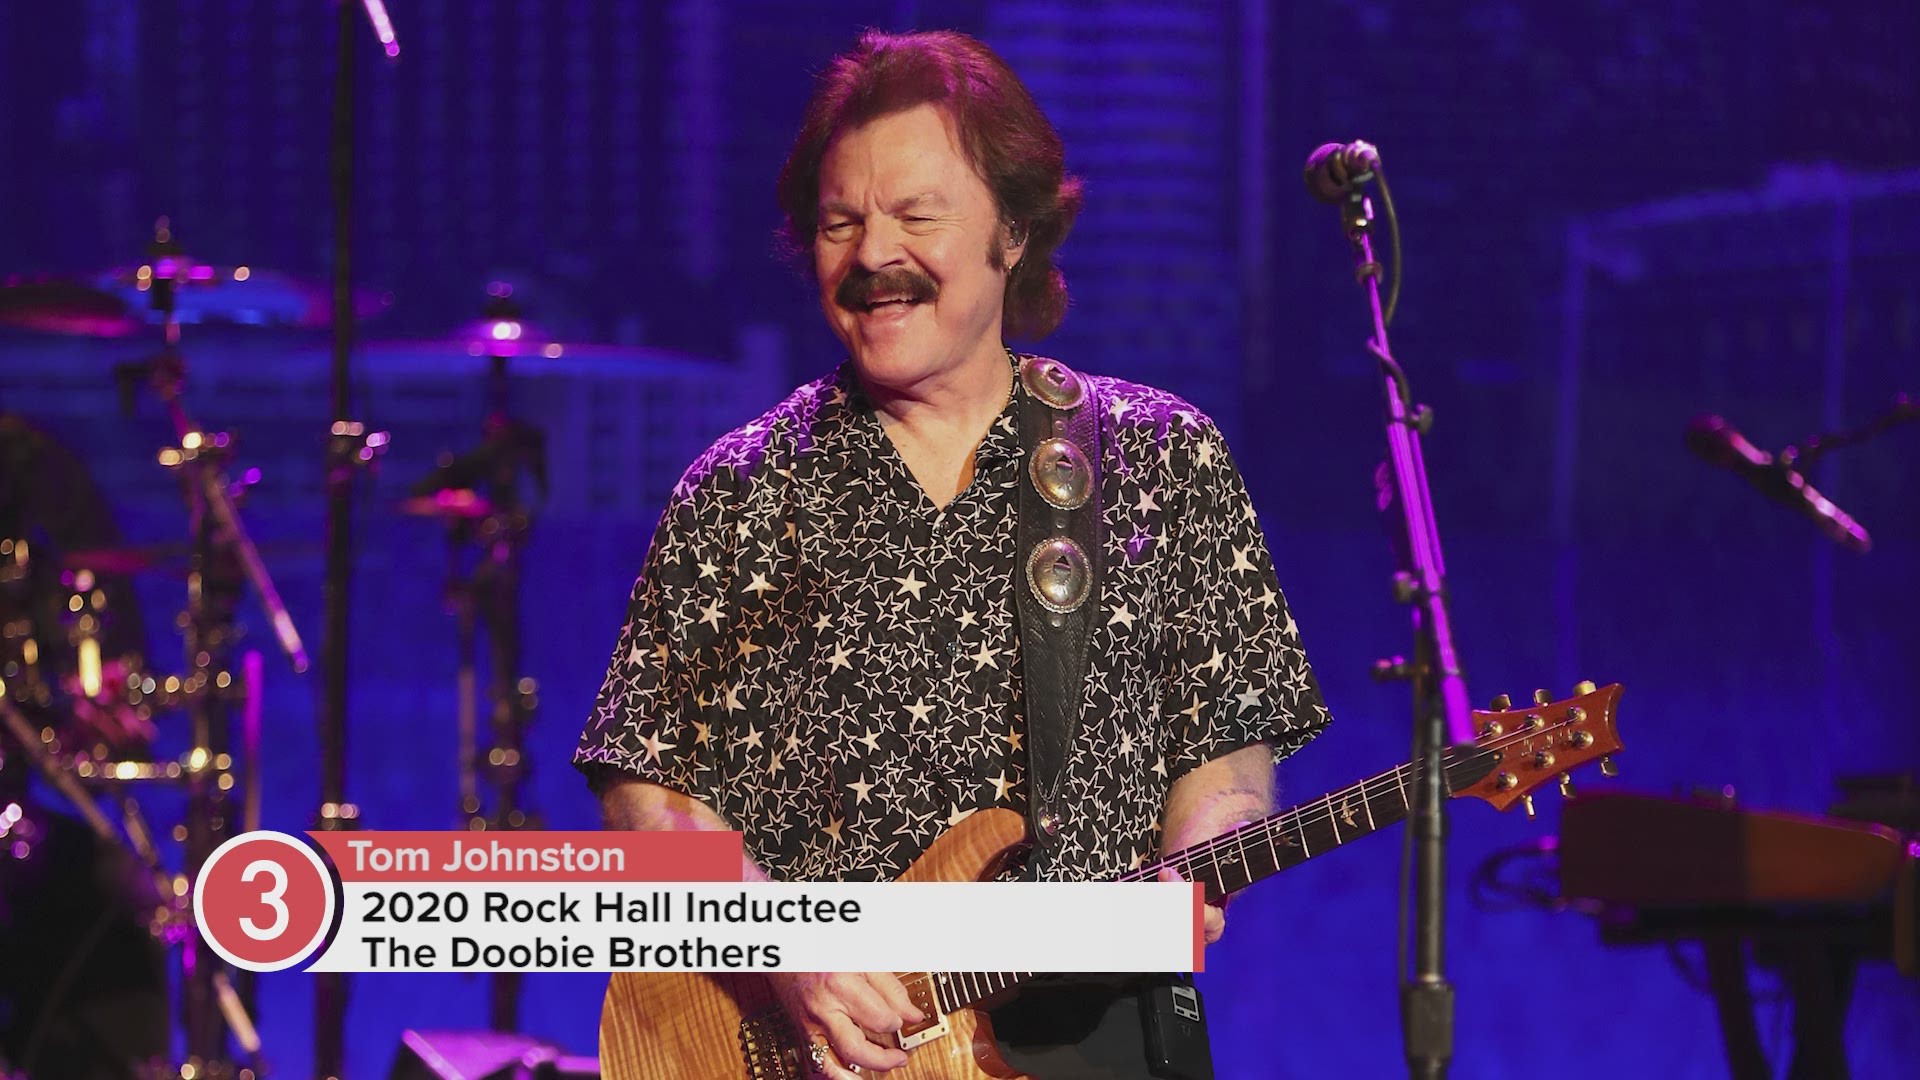 Singer talks about upcoming induction ceremony, the band's 50th anniversary tour and potential for new music from The Doobie Brothers.